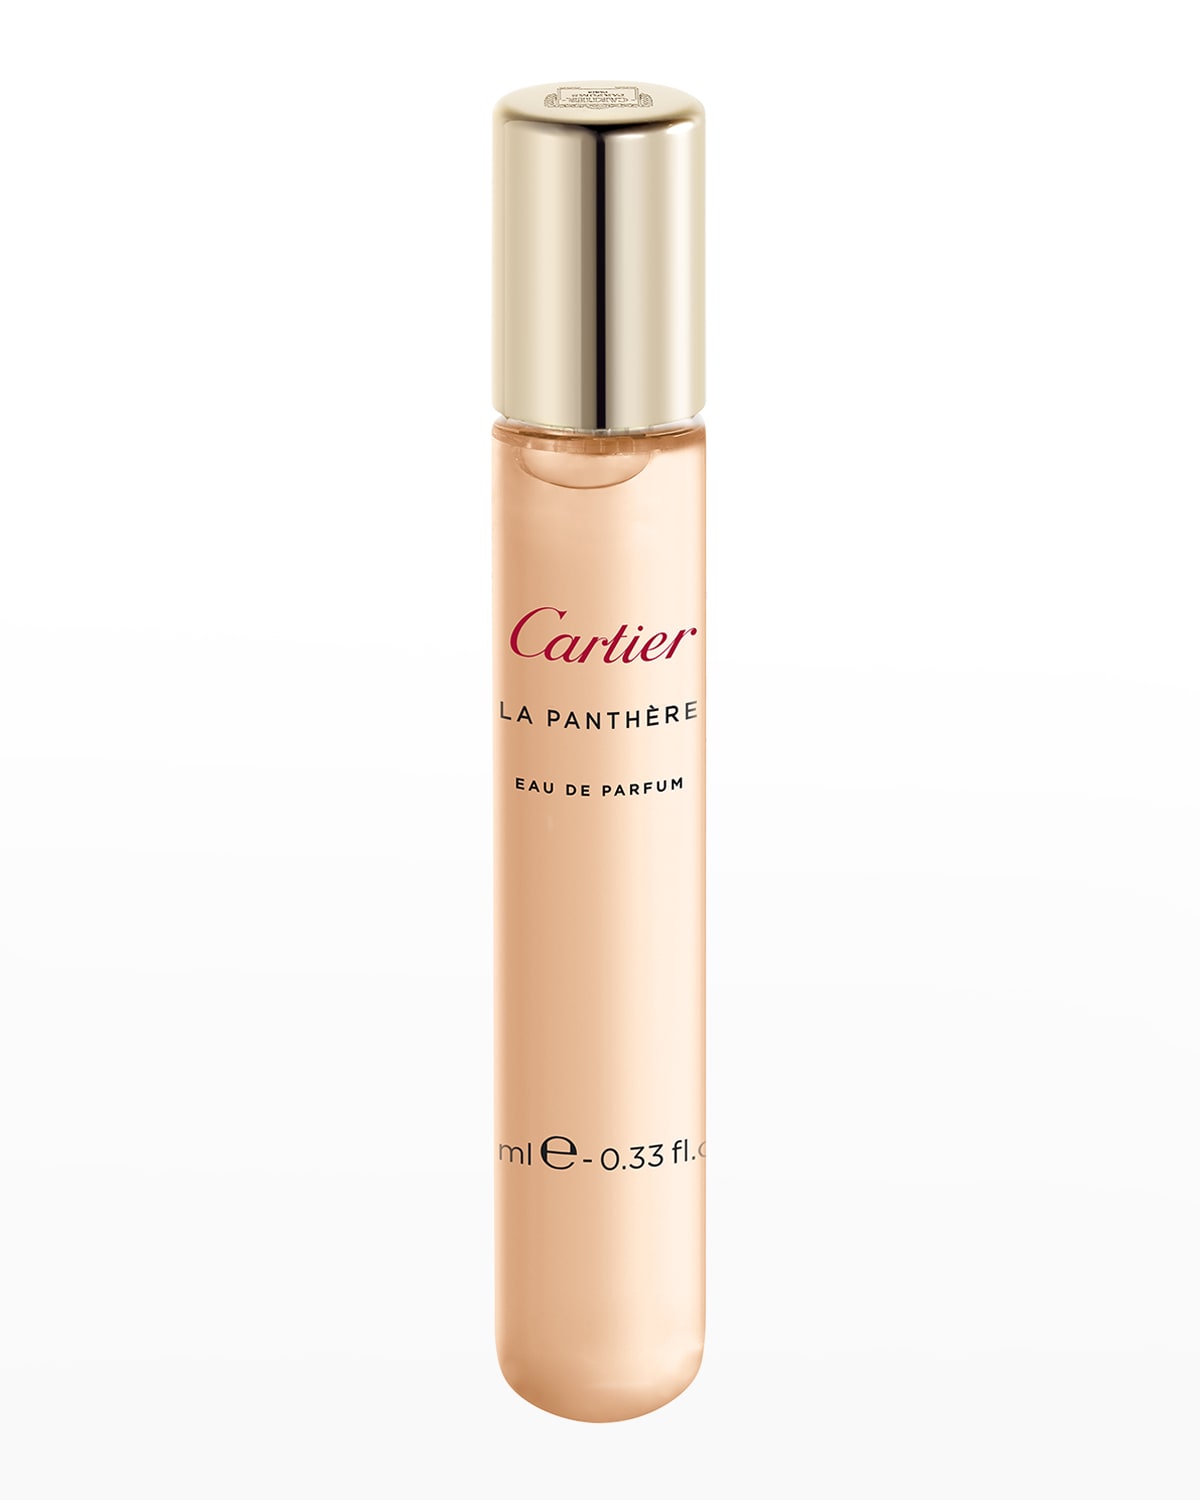 La Panthere Purse Spray, Yours with any $250 Cartier Purchase